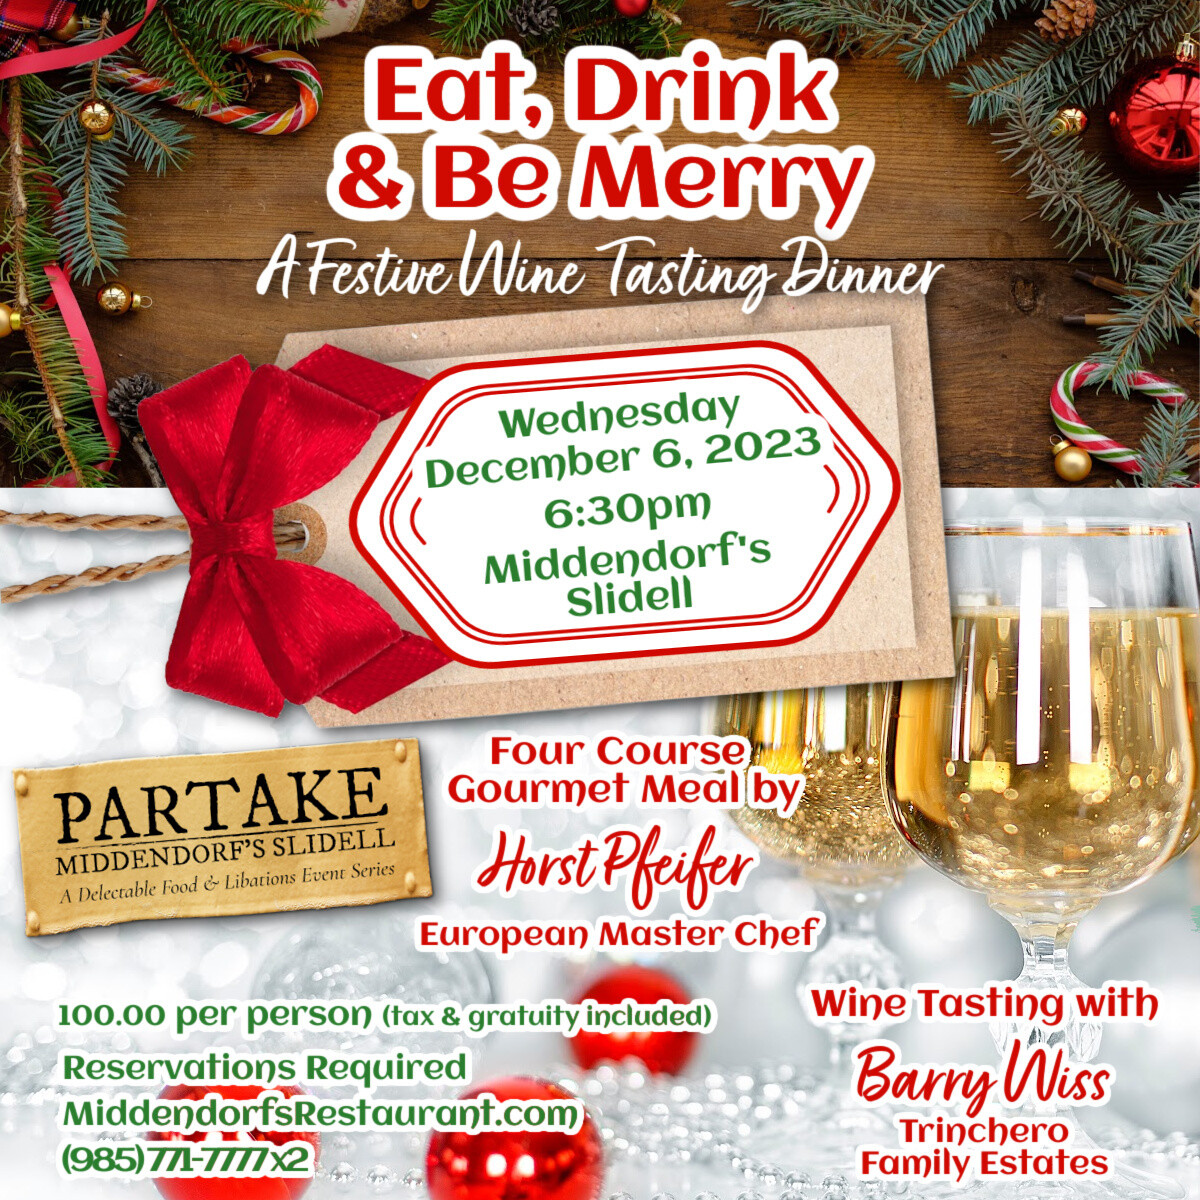 SLIDELL PARTAKE -- Eat, Drink & Be Merry